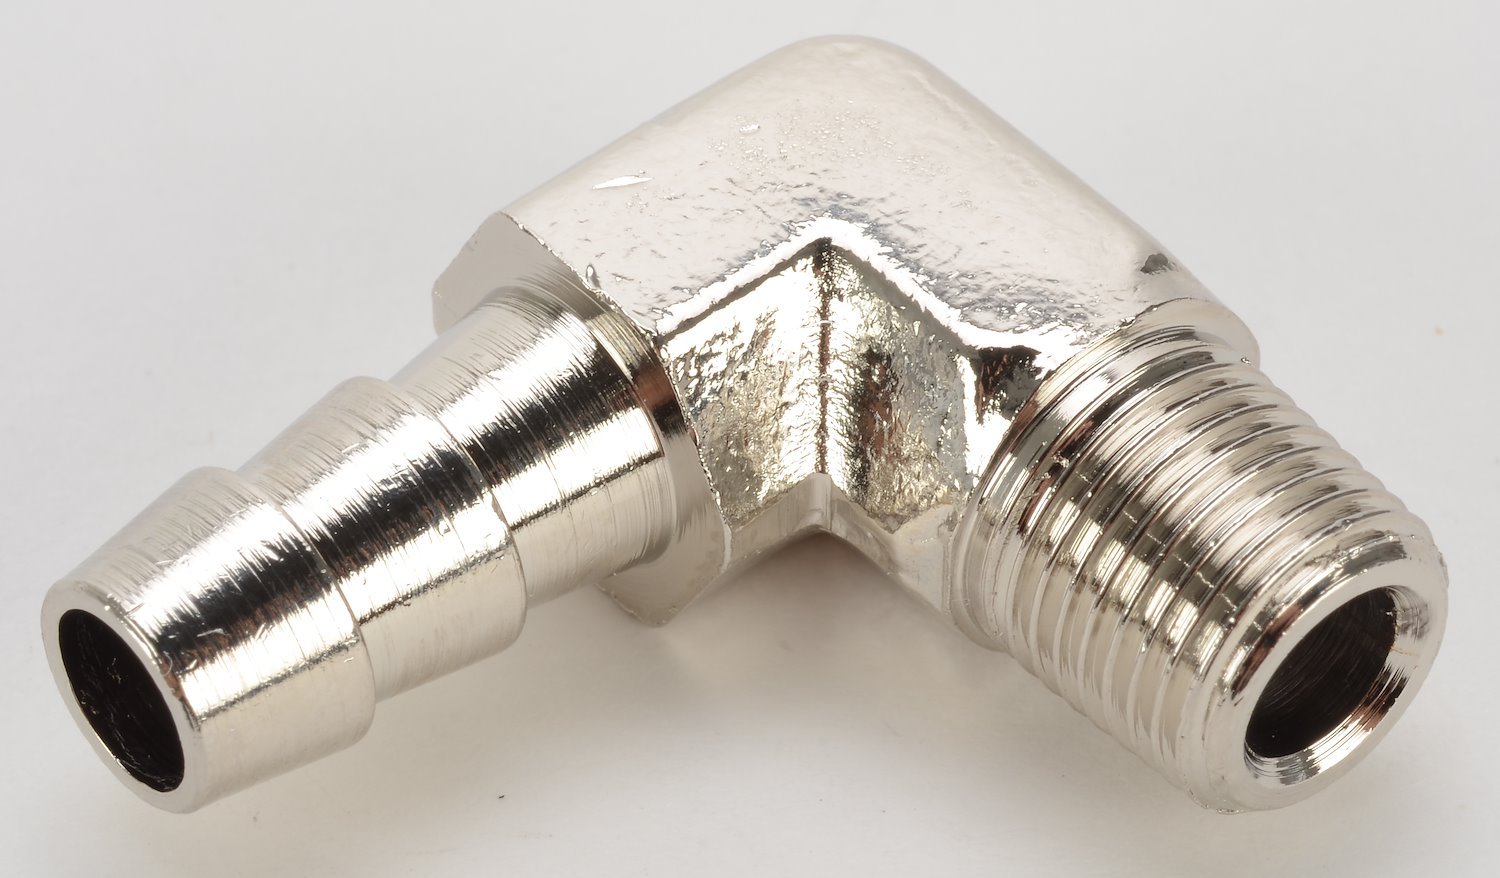 NPT 90-Degree Hose Barb Fitting [1/8 in. NPT to 5/16 in. Hose, Nickel-Plated Brass]